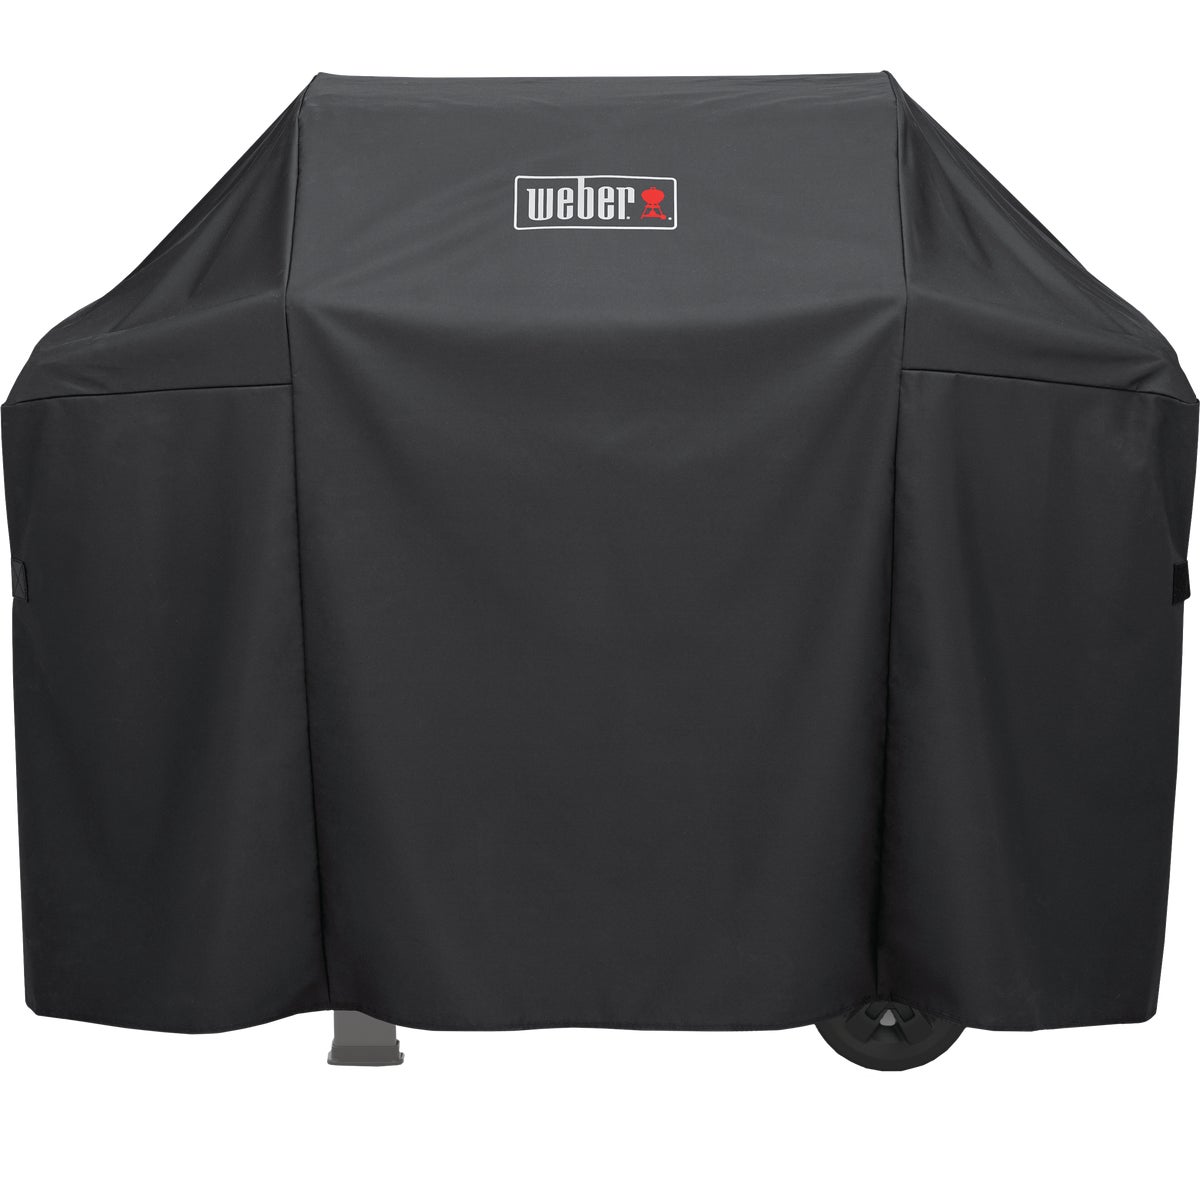 Item 800032, 3-burner gas grill cover is a breathable, weather resistant cover that 